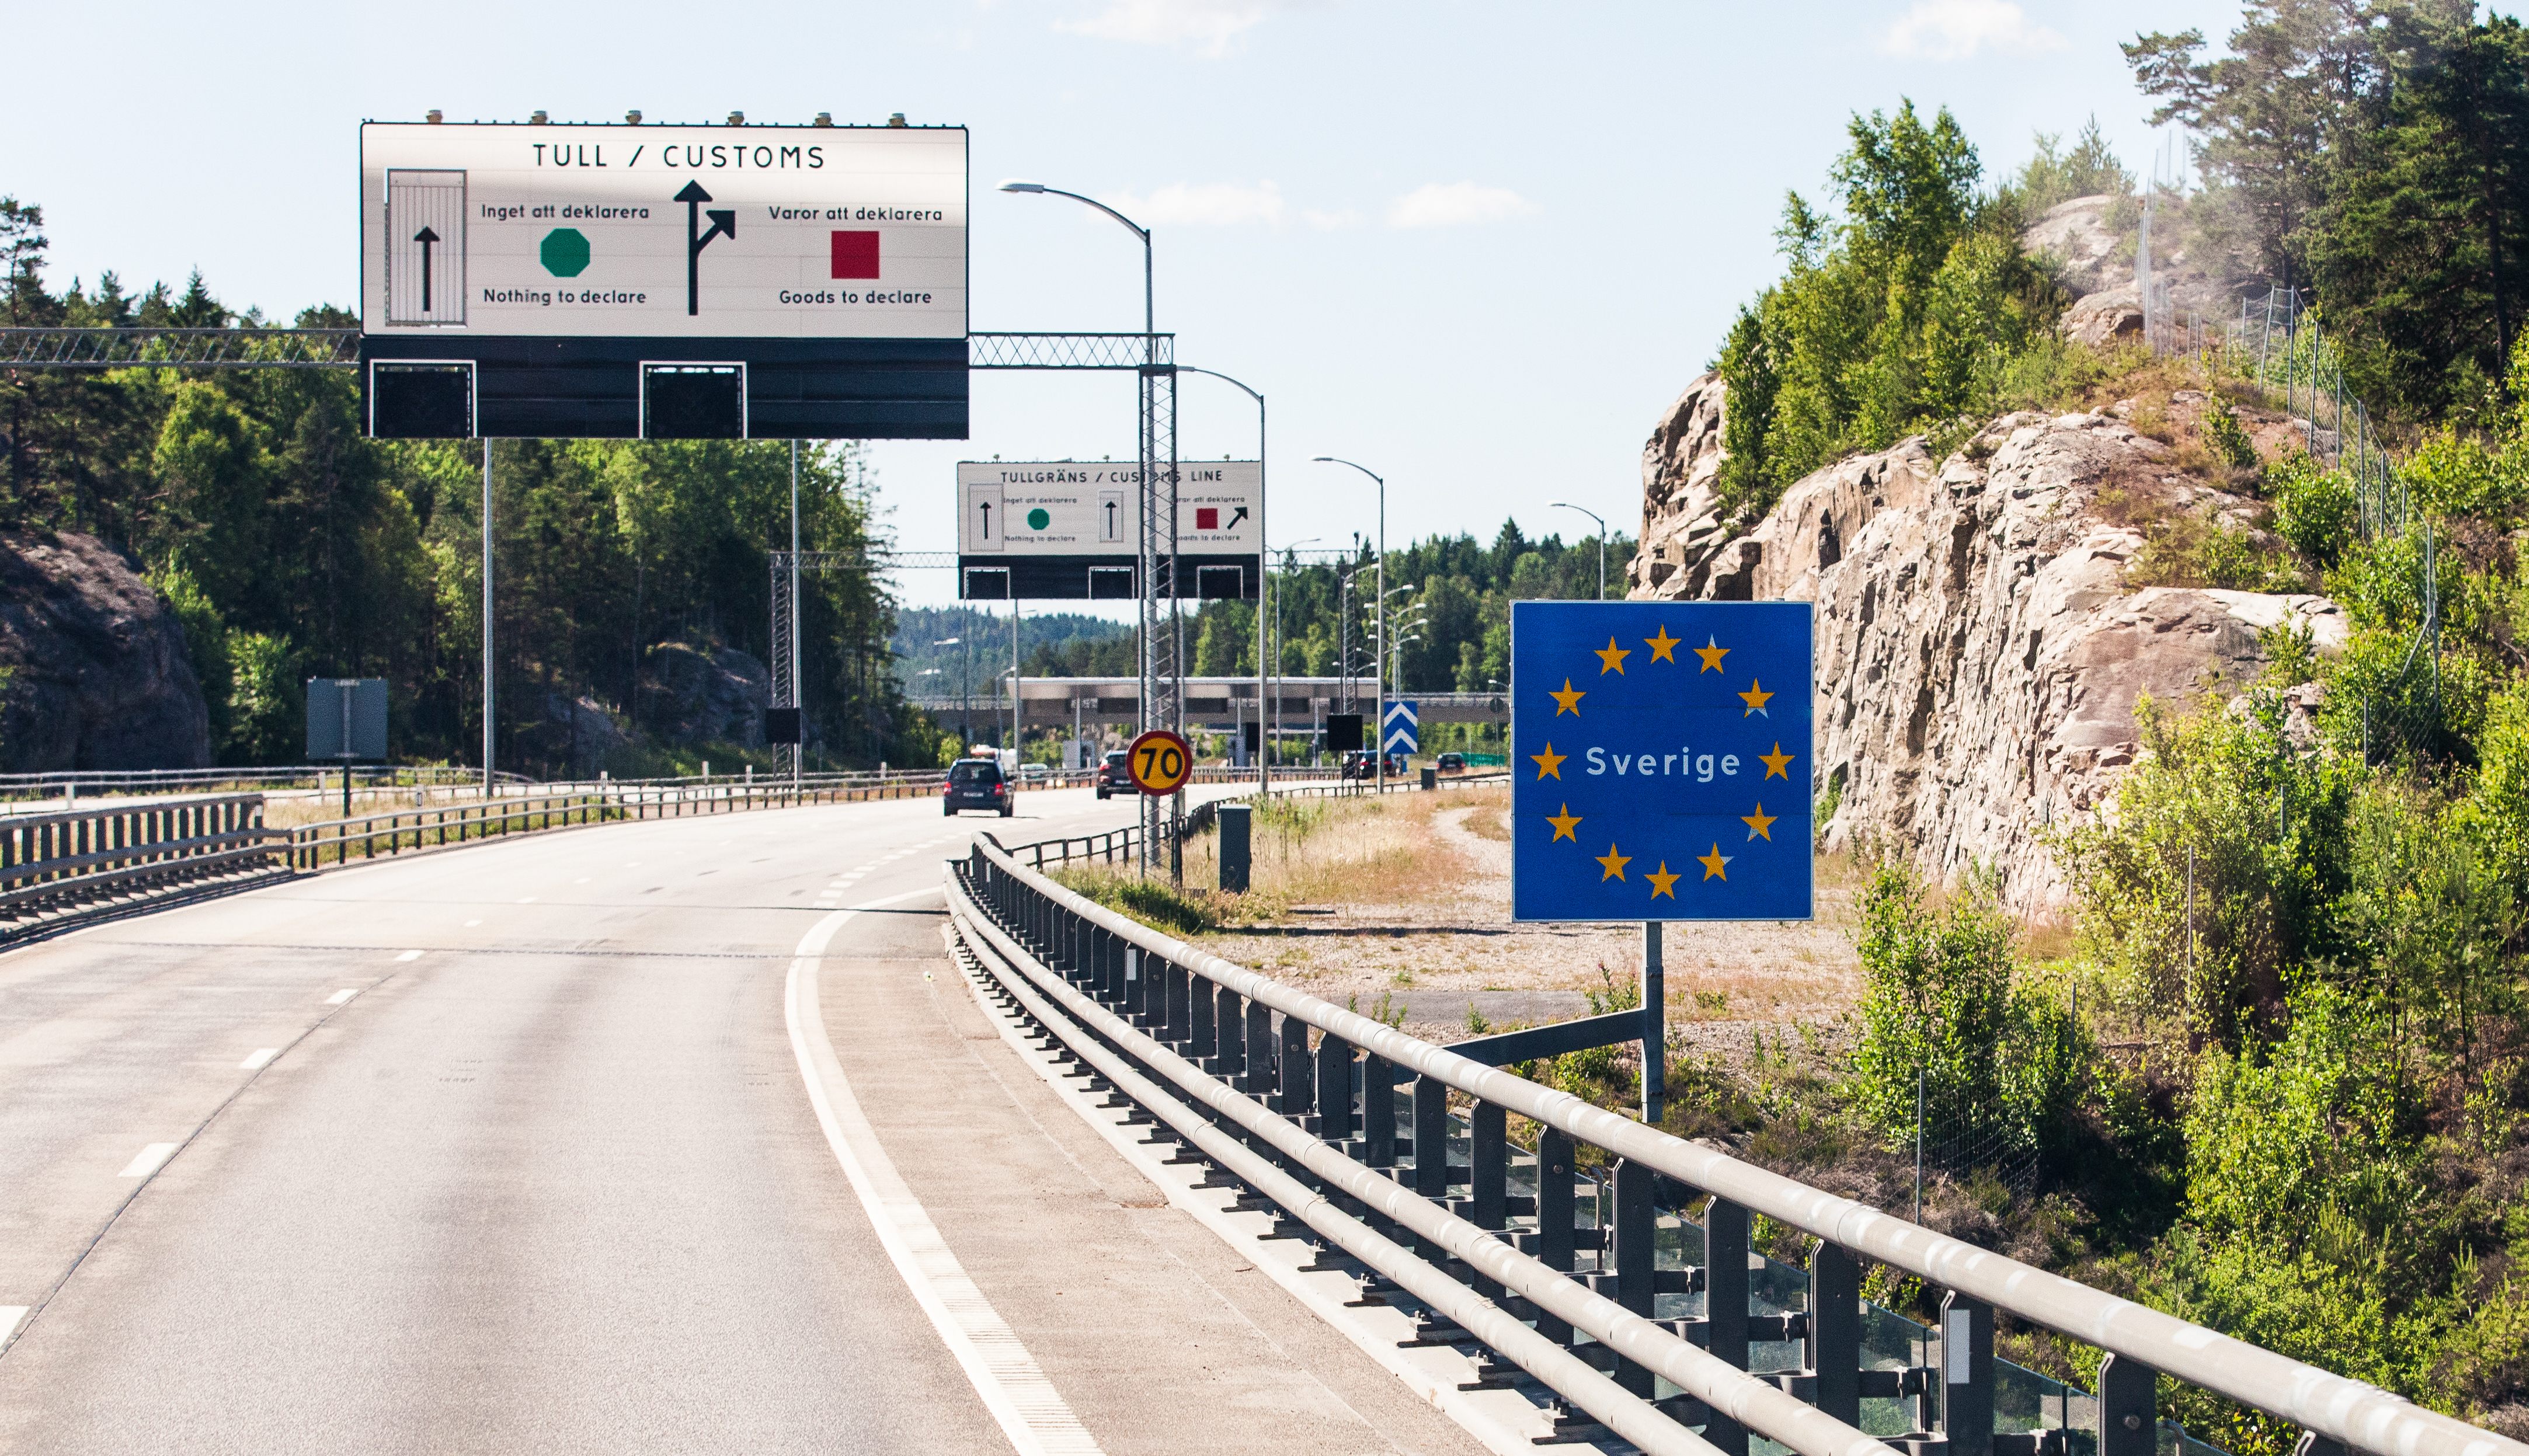 crossing Norway - Sweden border on the way to Gothenburg, Sweden, June 2014, picture 1